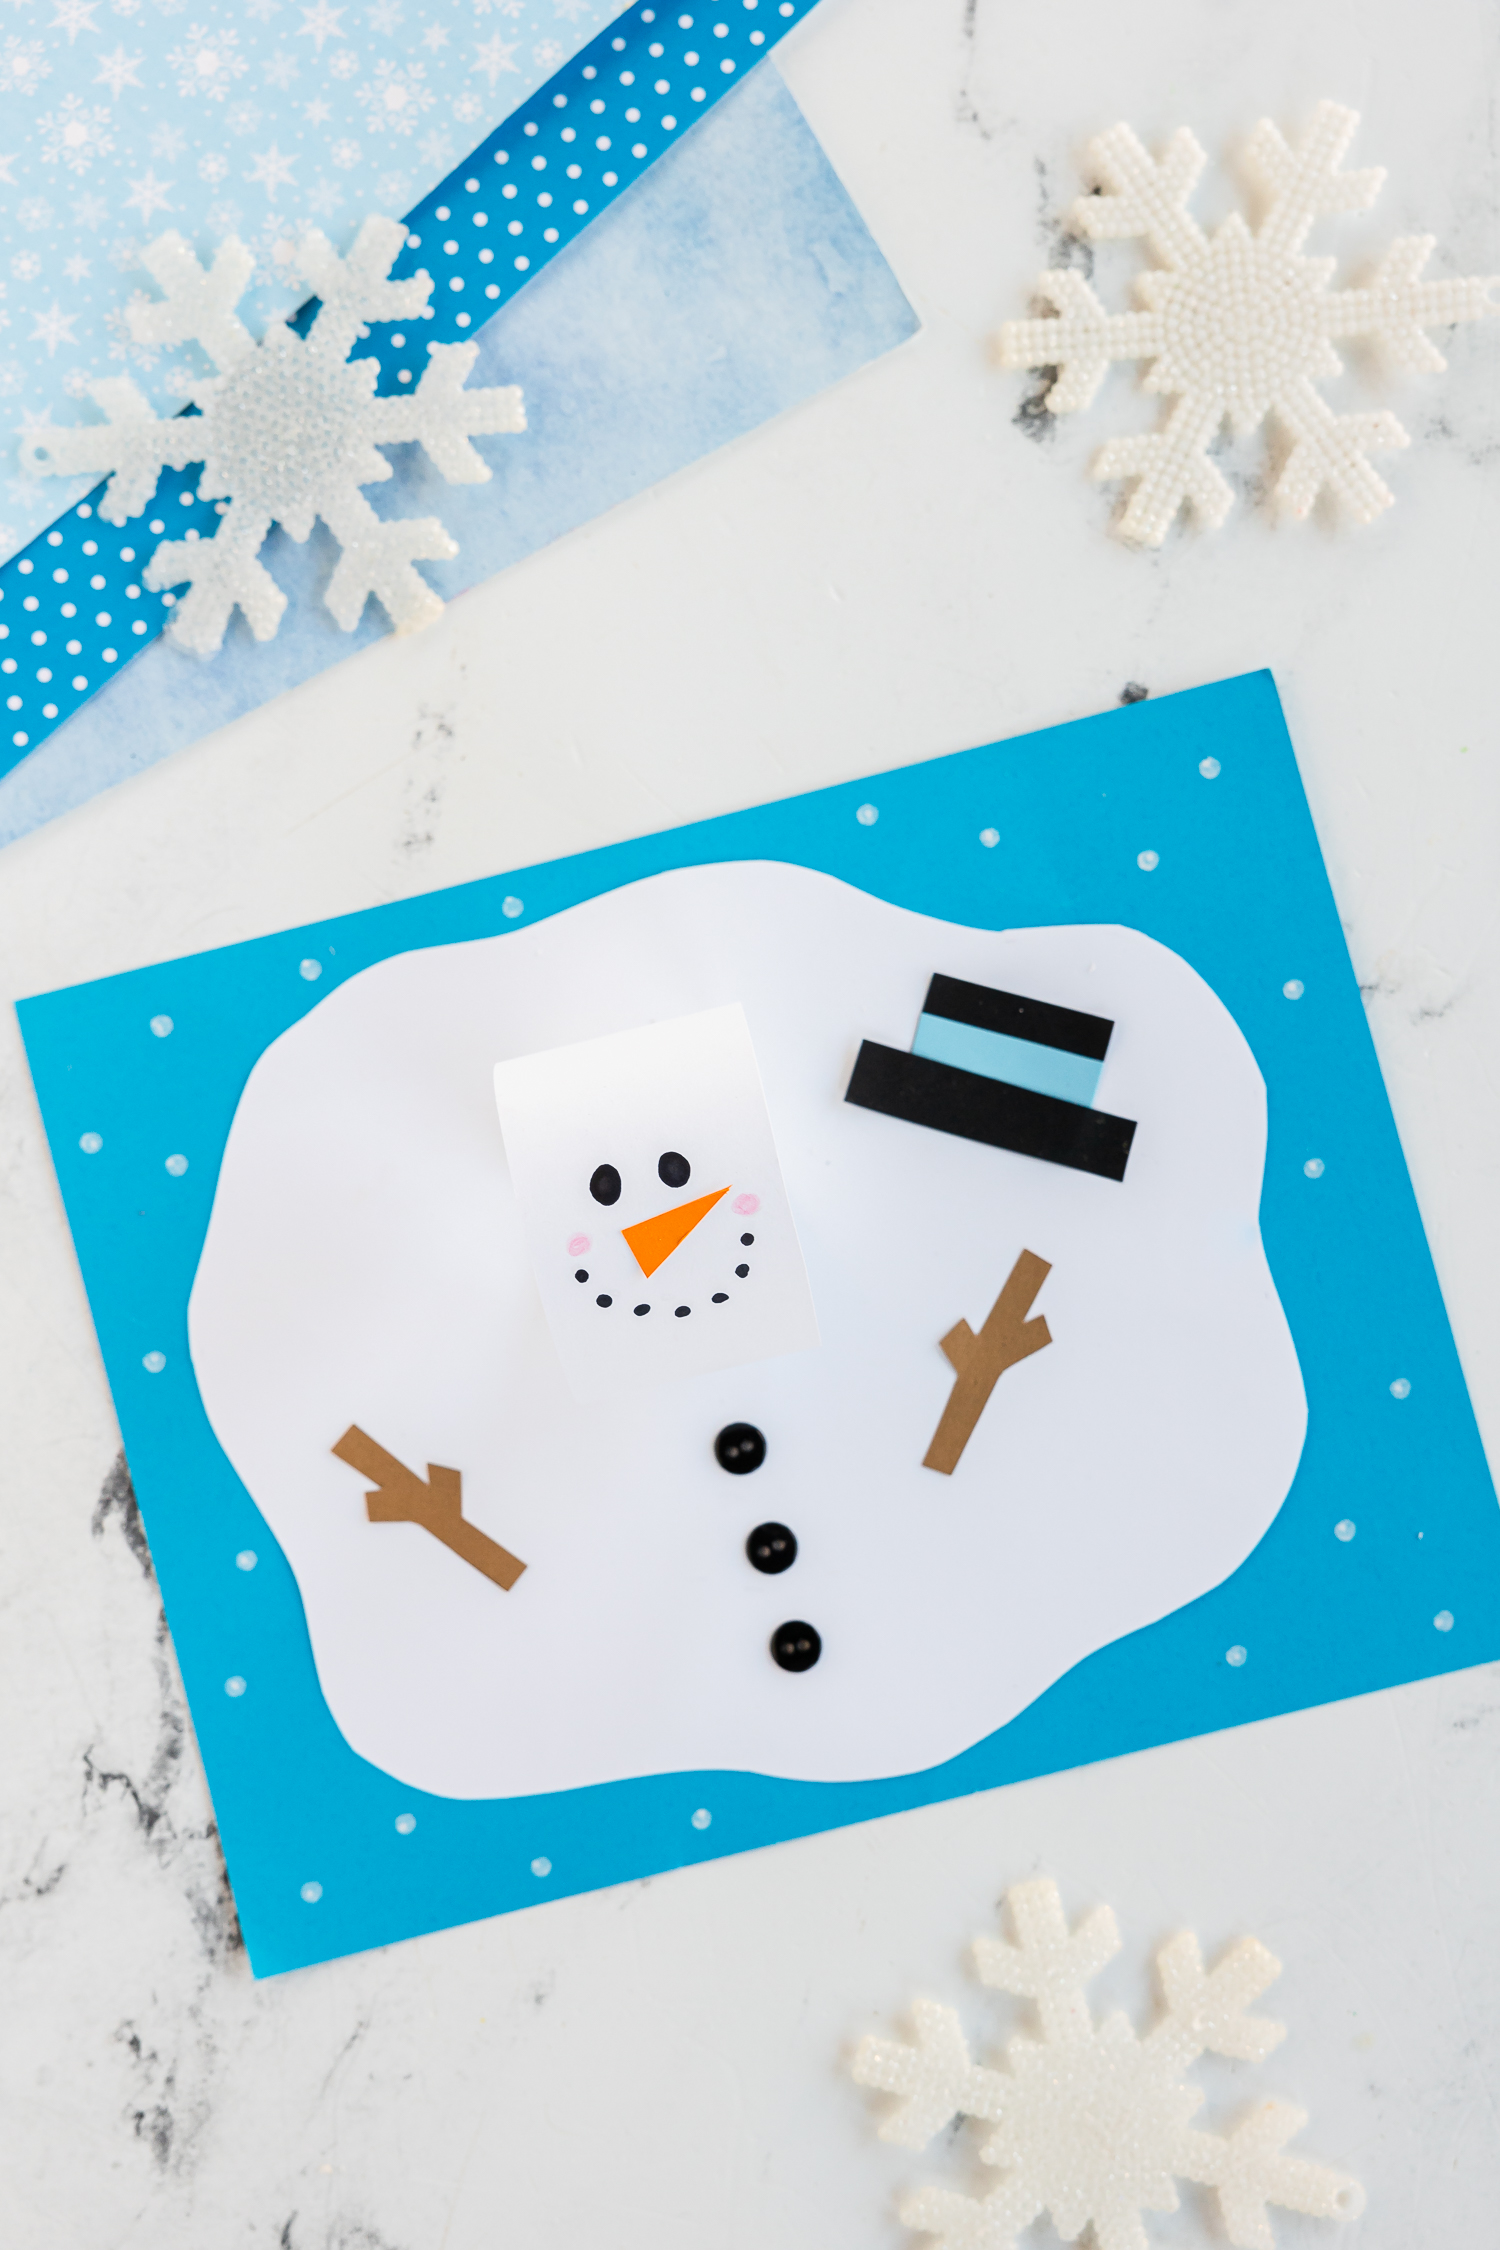 Paper Melted Snowman Craft for Kids